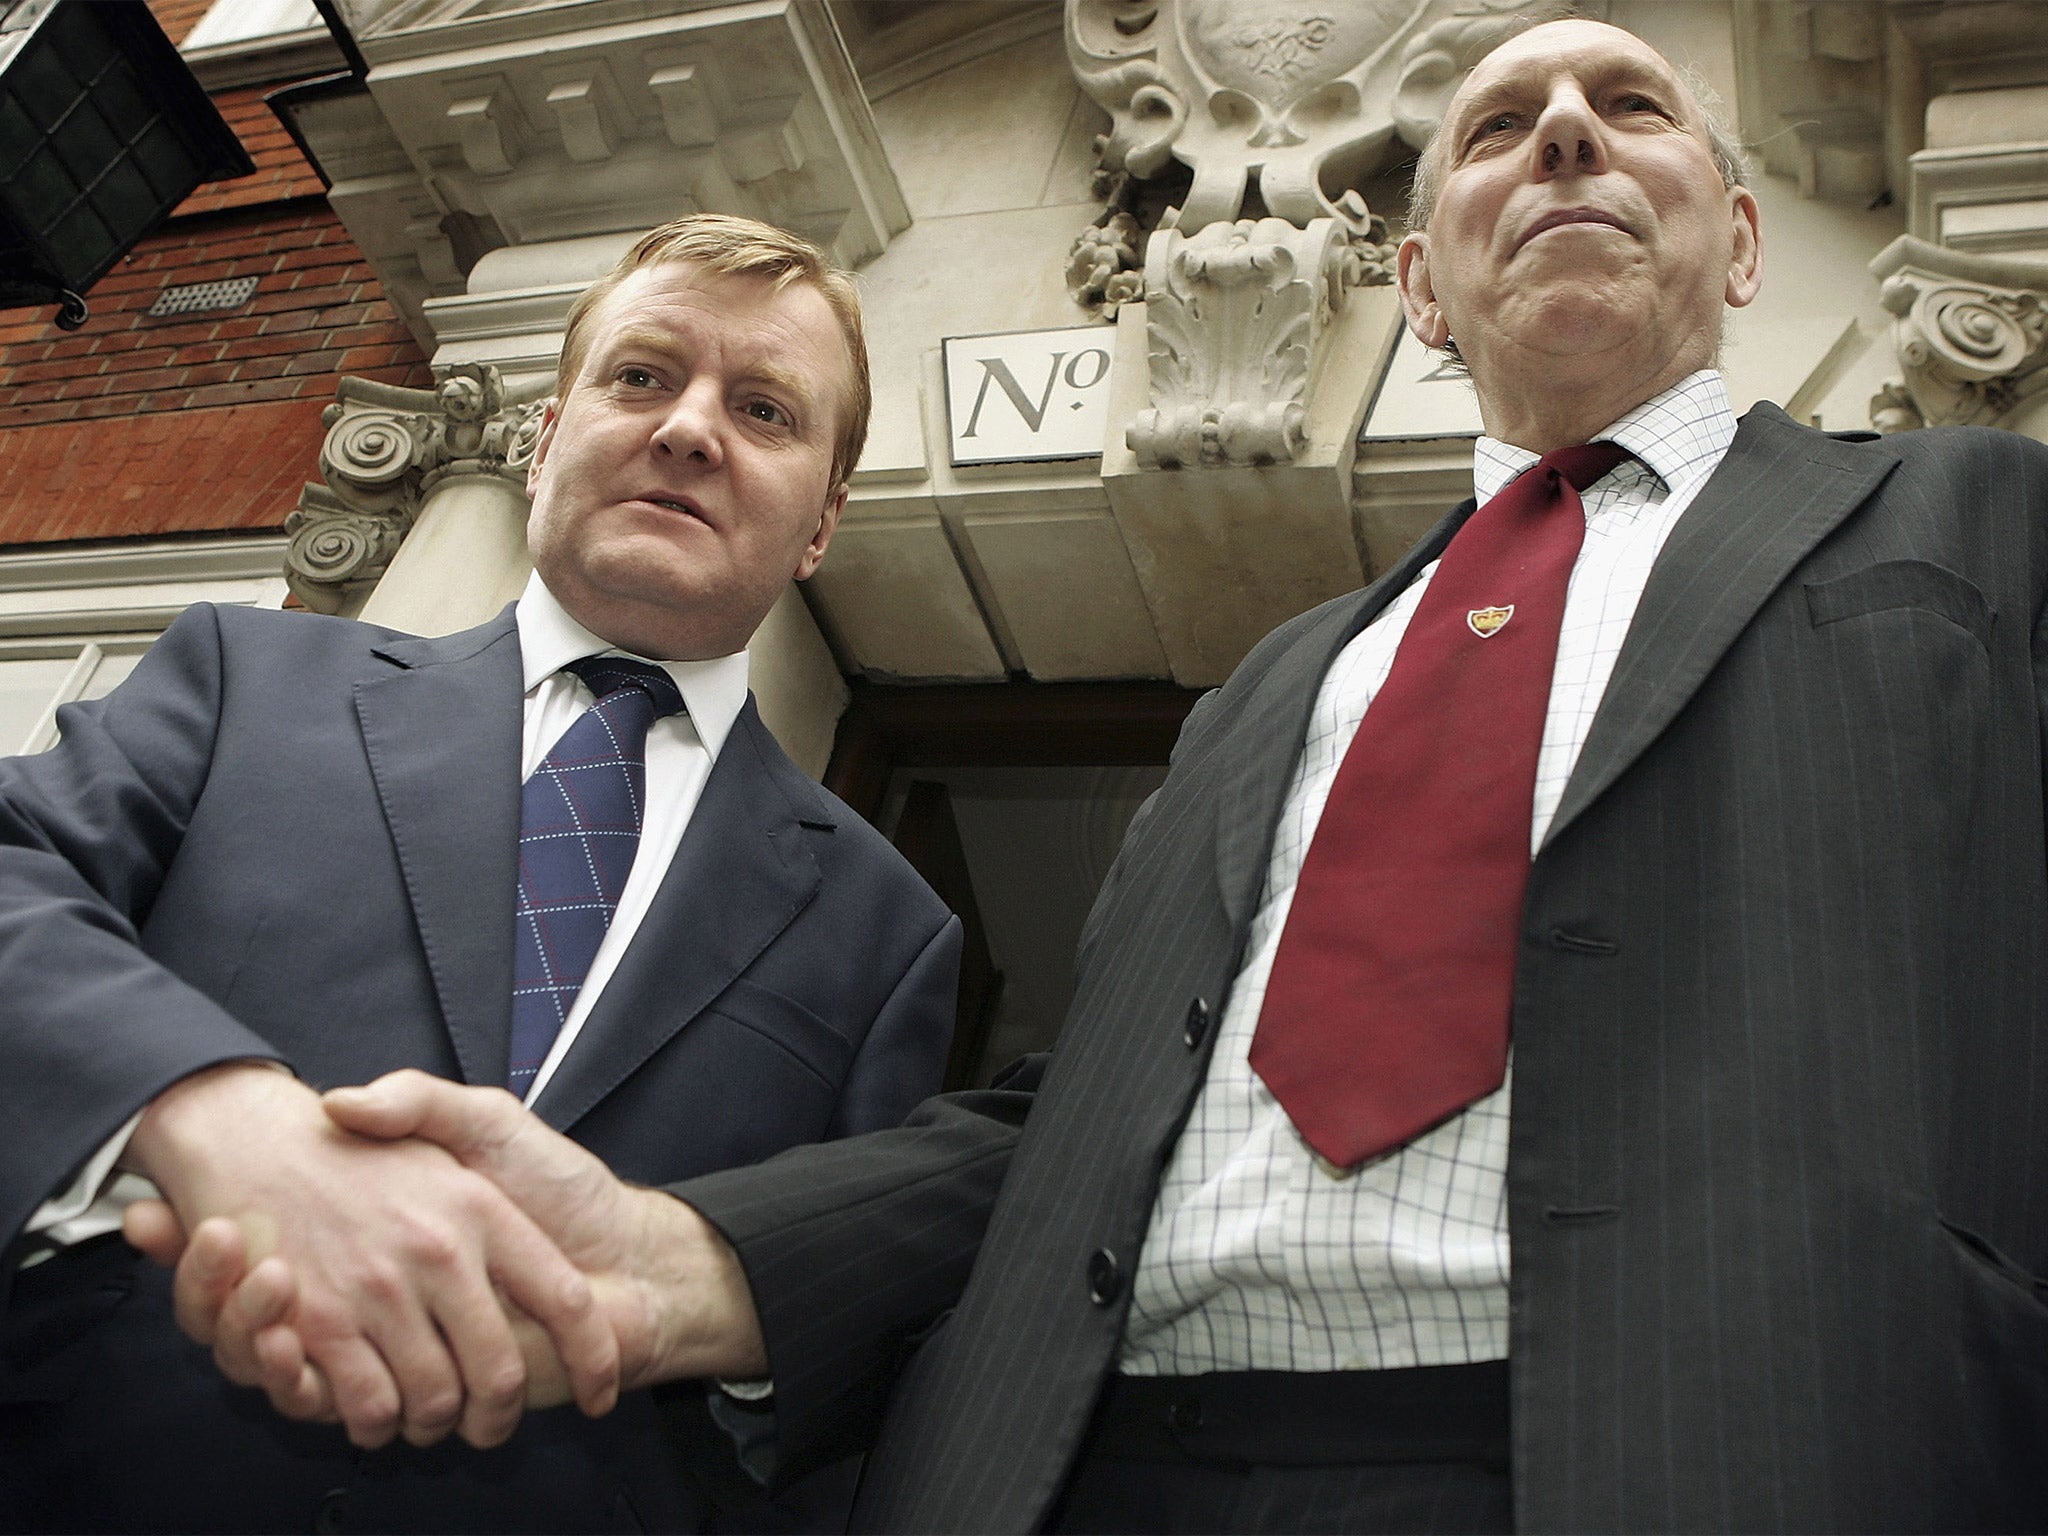 Sedgemore (right) in 2005 with the then Liberal Democrat leader Charles Kennedy, following his defection from Labour